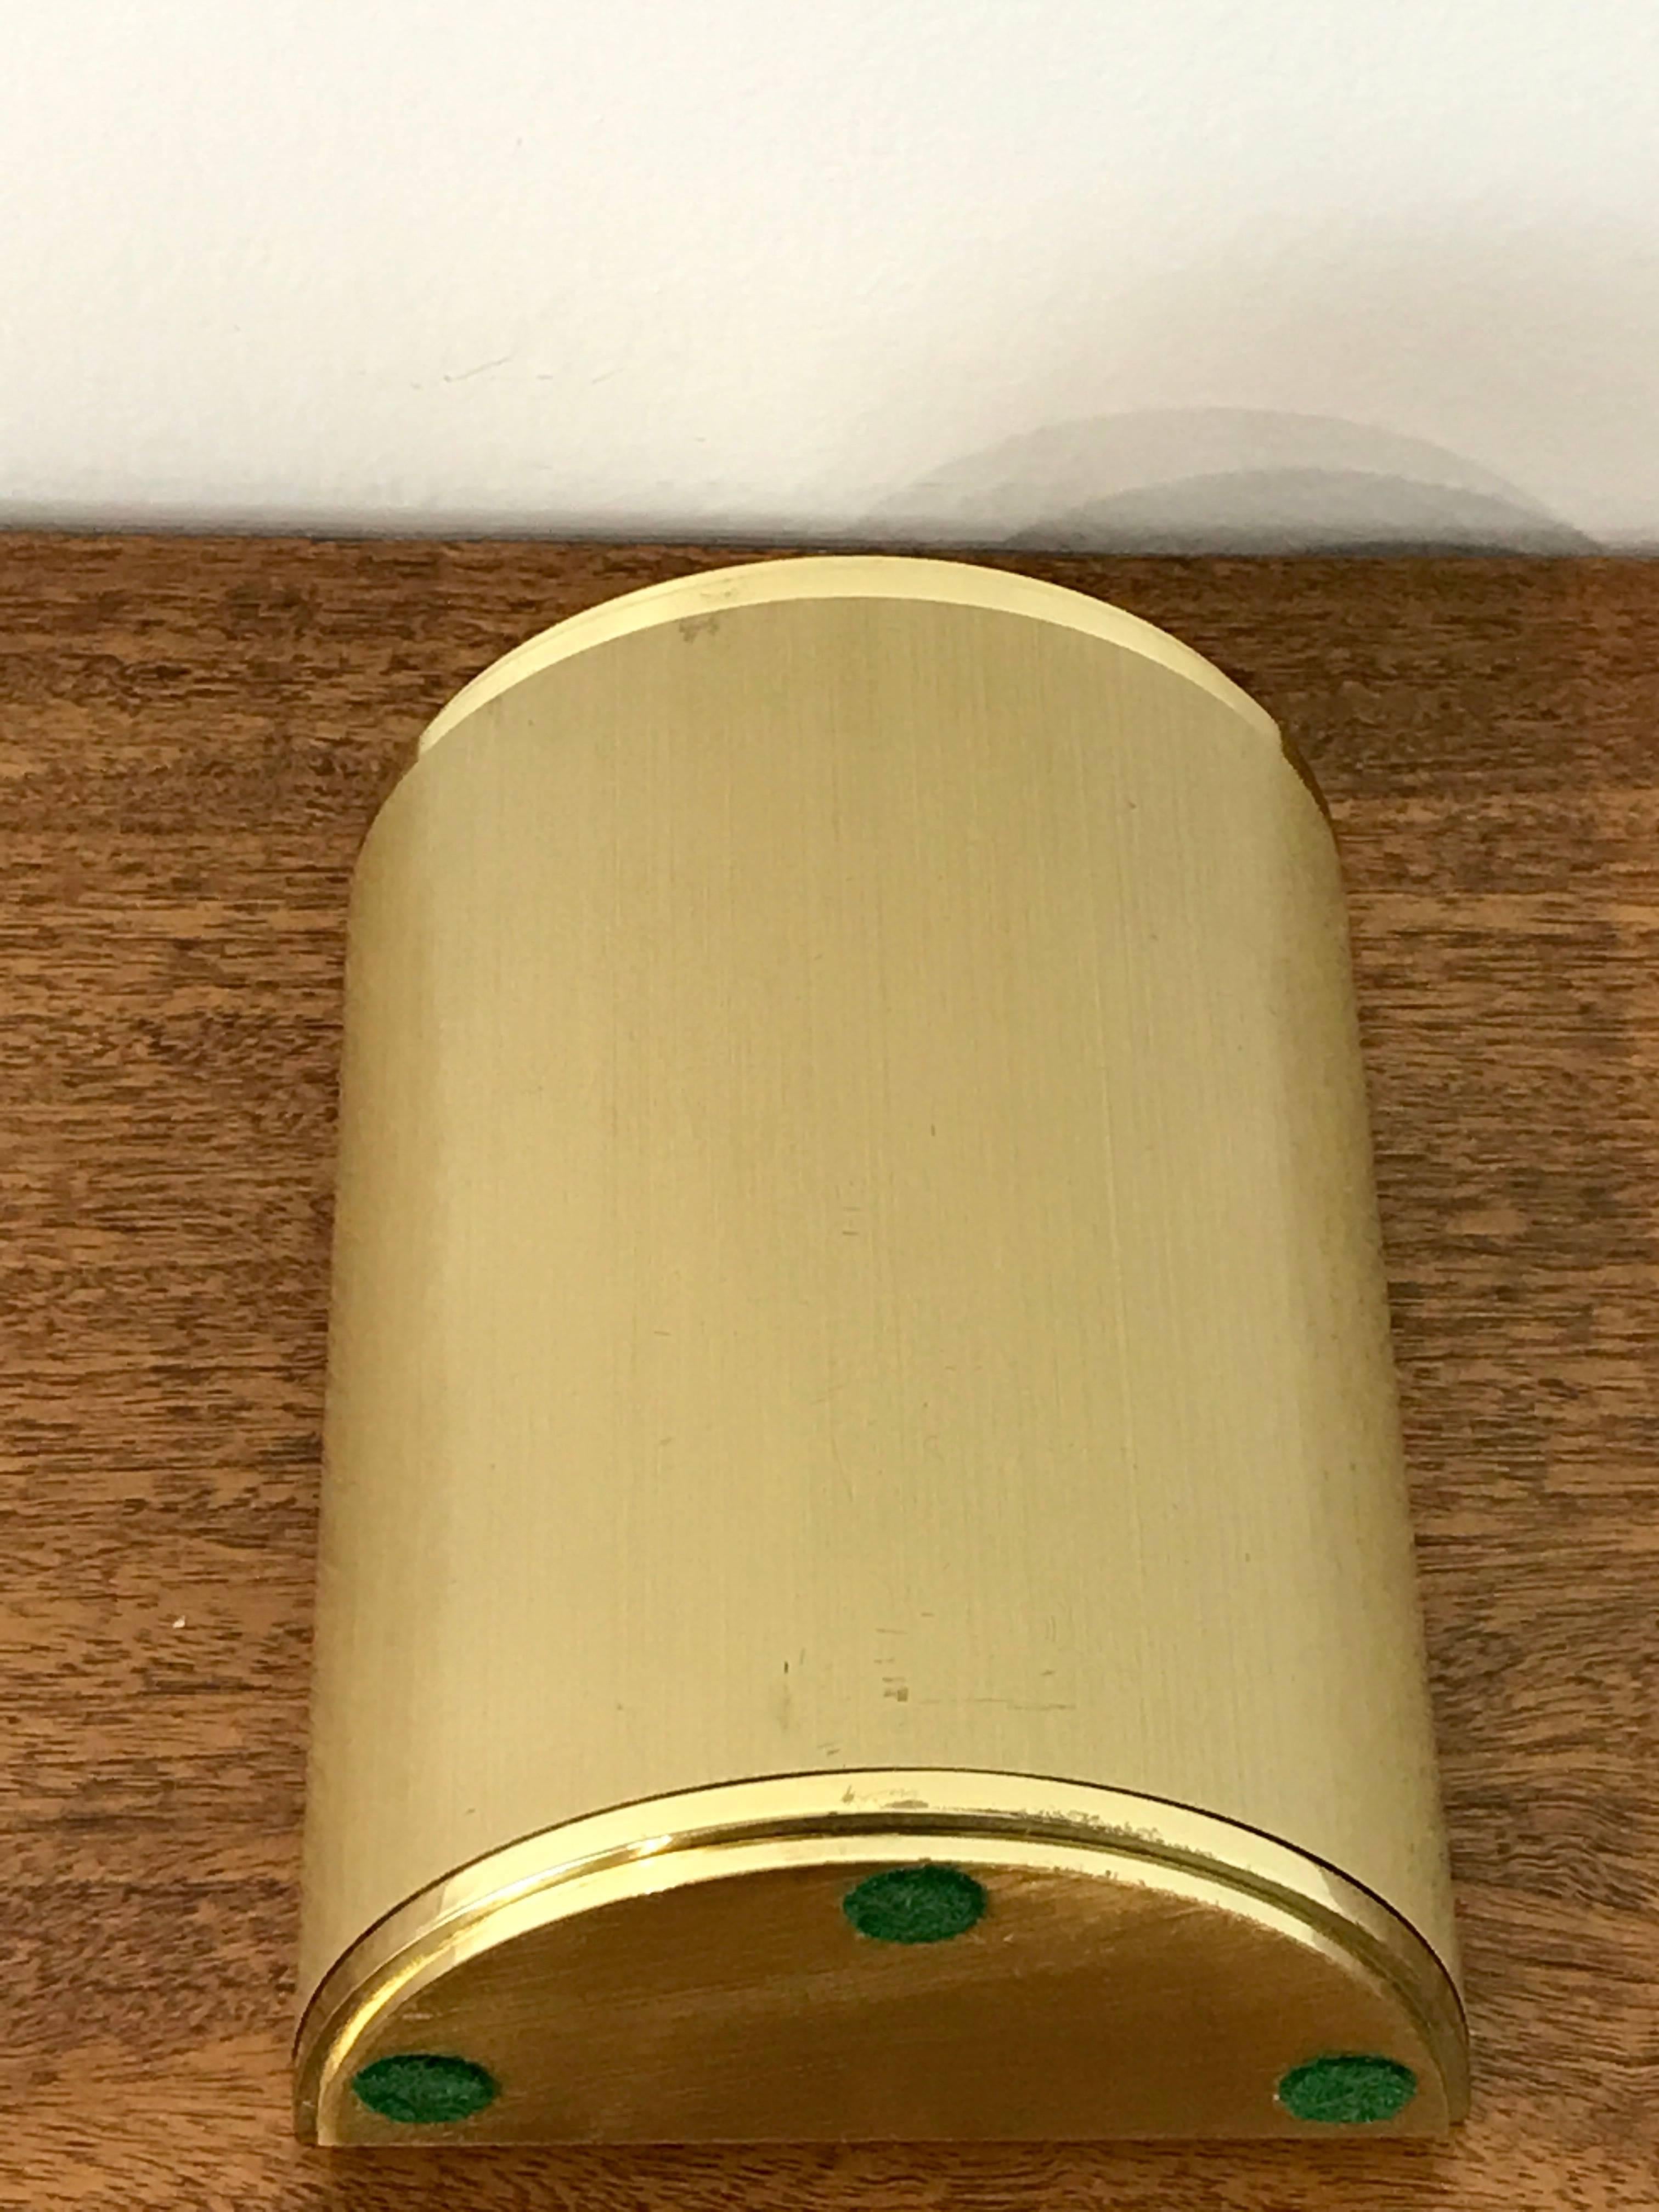 Late 20th Century Tiffany & Co. Swiss Movement Table Alarm Clock, with Concealed Chamber